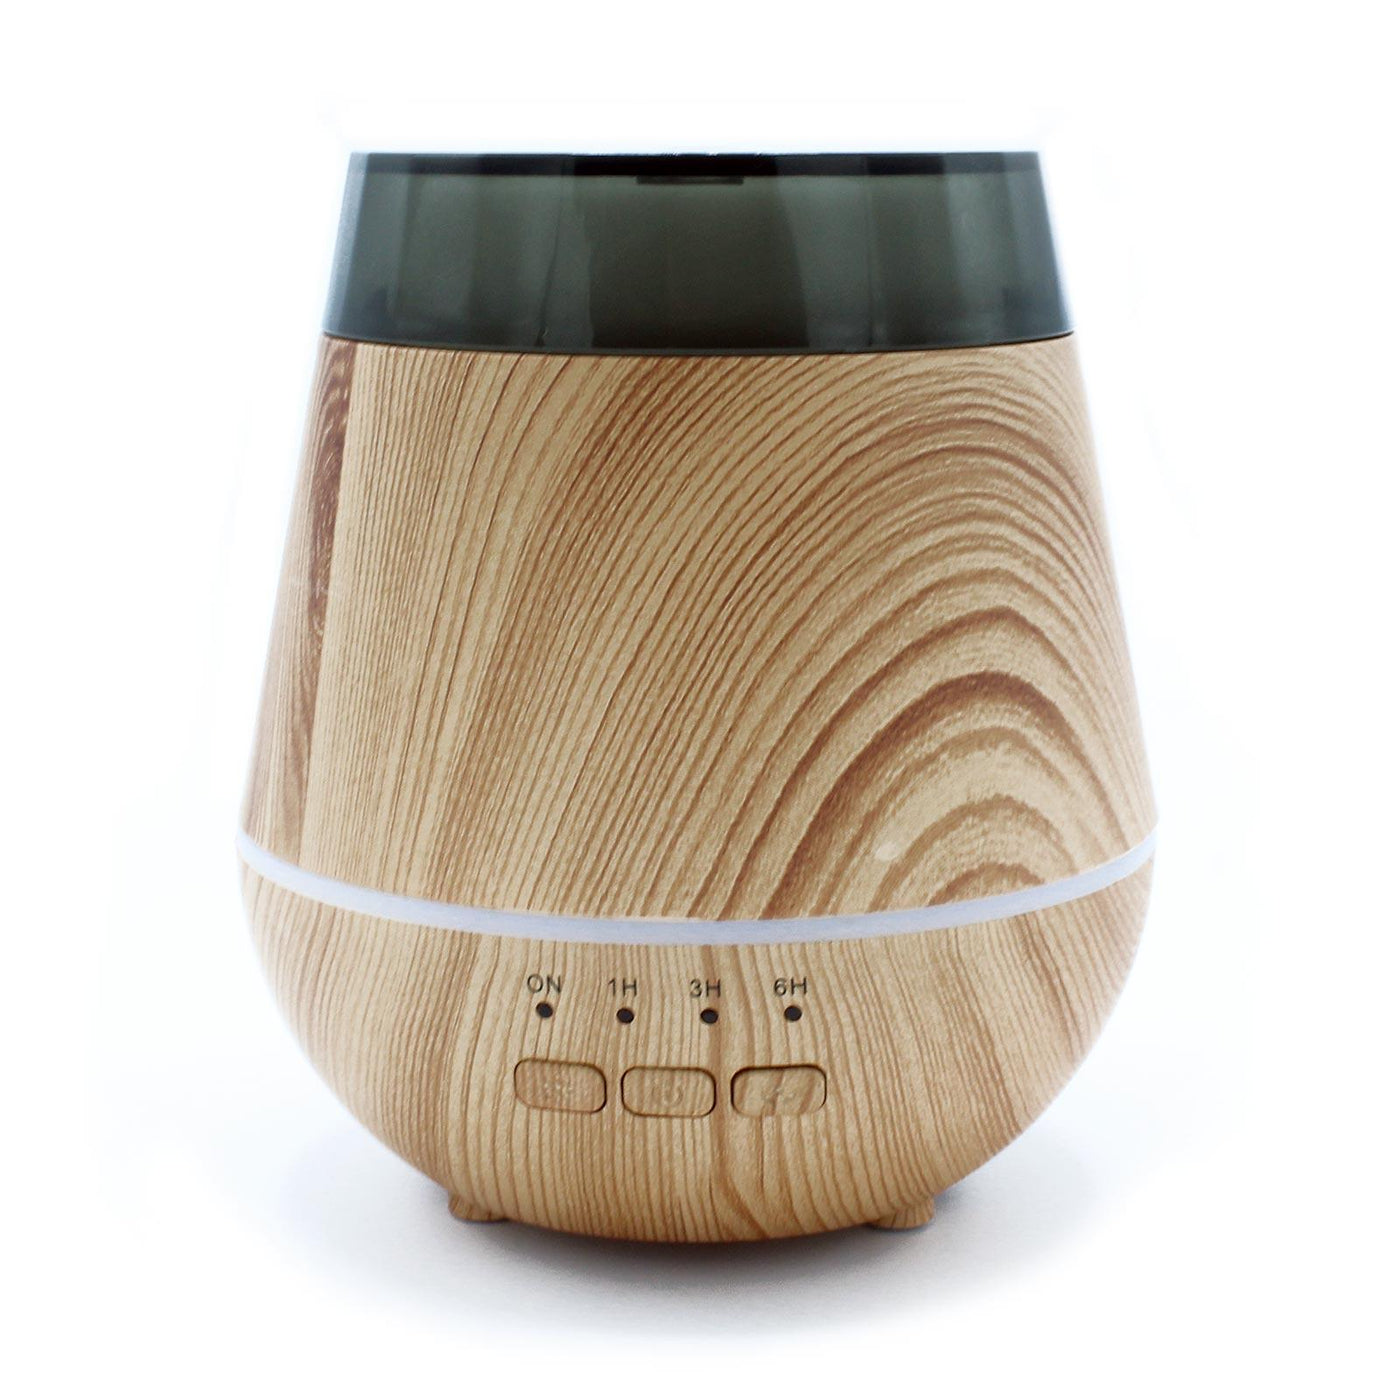 Helsinki Ultrasonic LED Light Colour Change Aroma Diffuser With Timer.